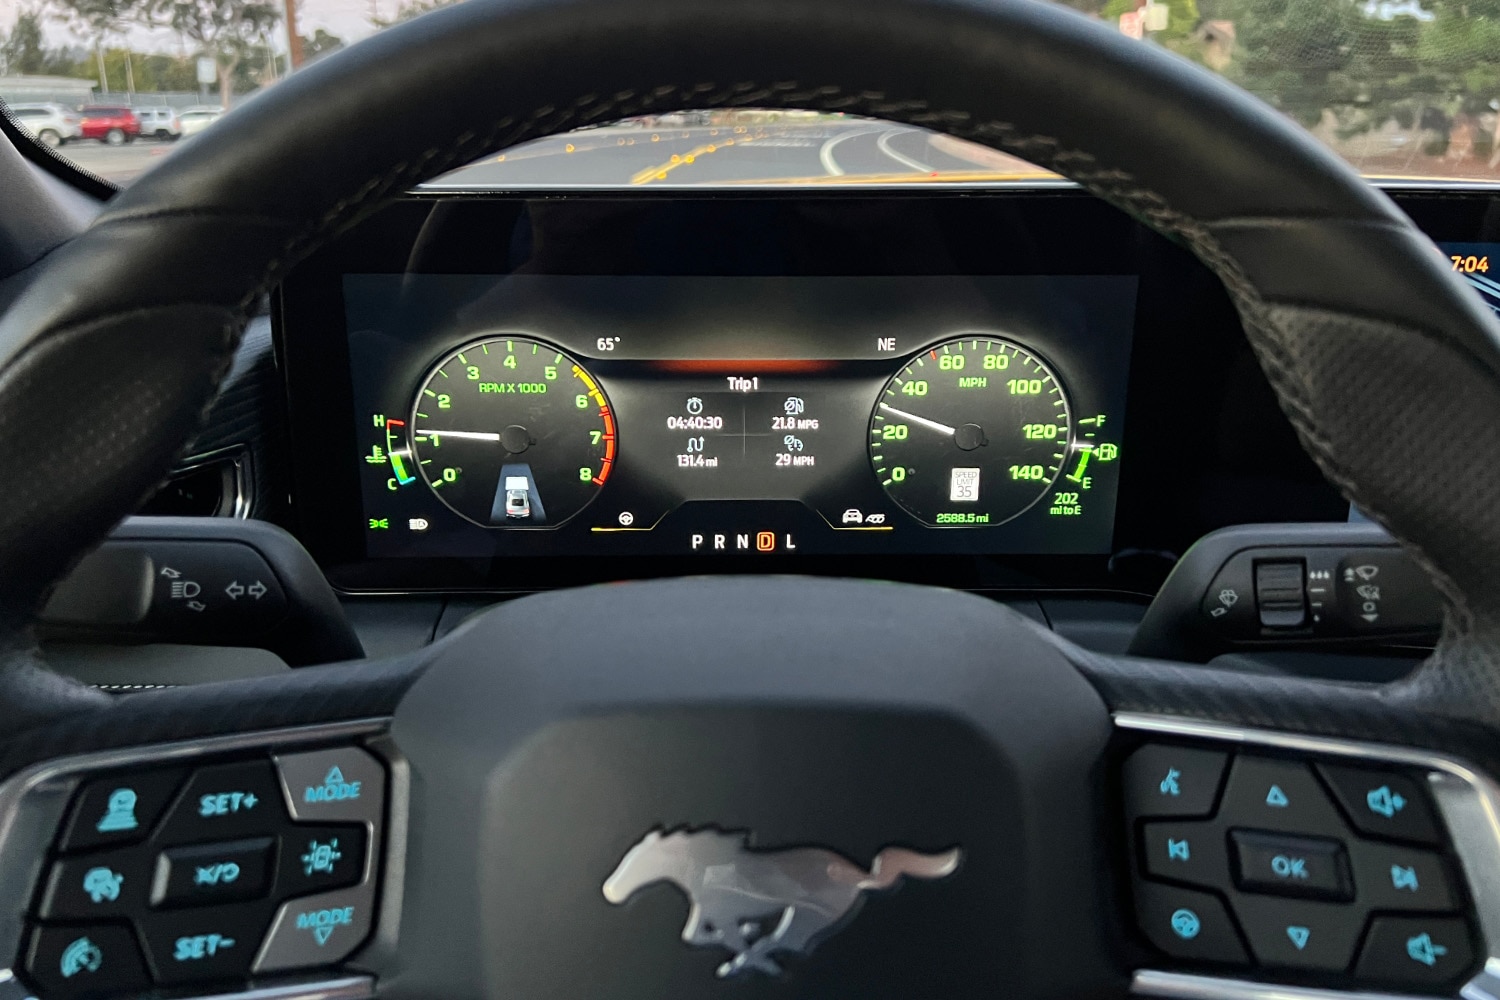 2024 Ford Mustang instrument cluster screen displaying the configurable heritage-inspired, fox body-like retro gauges